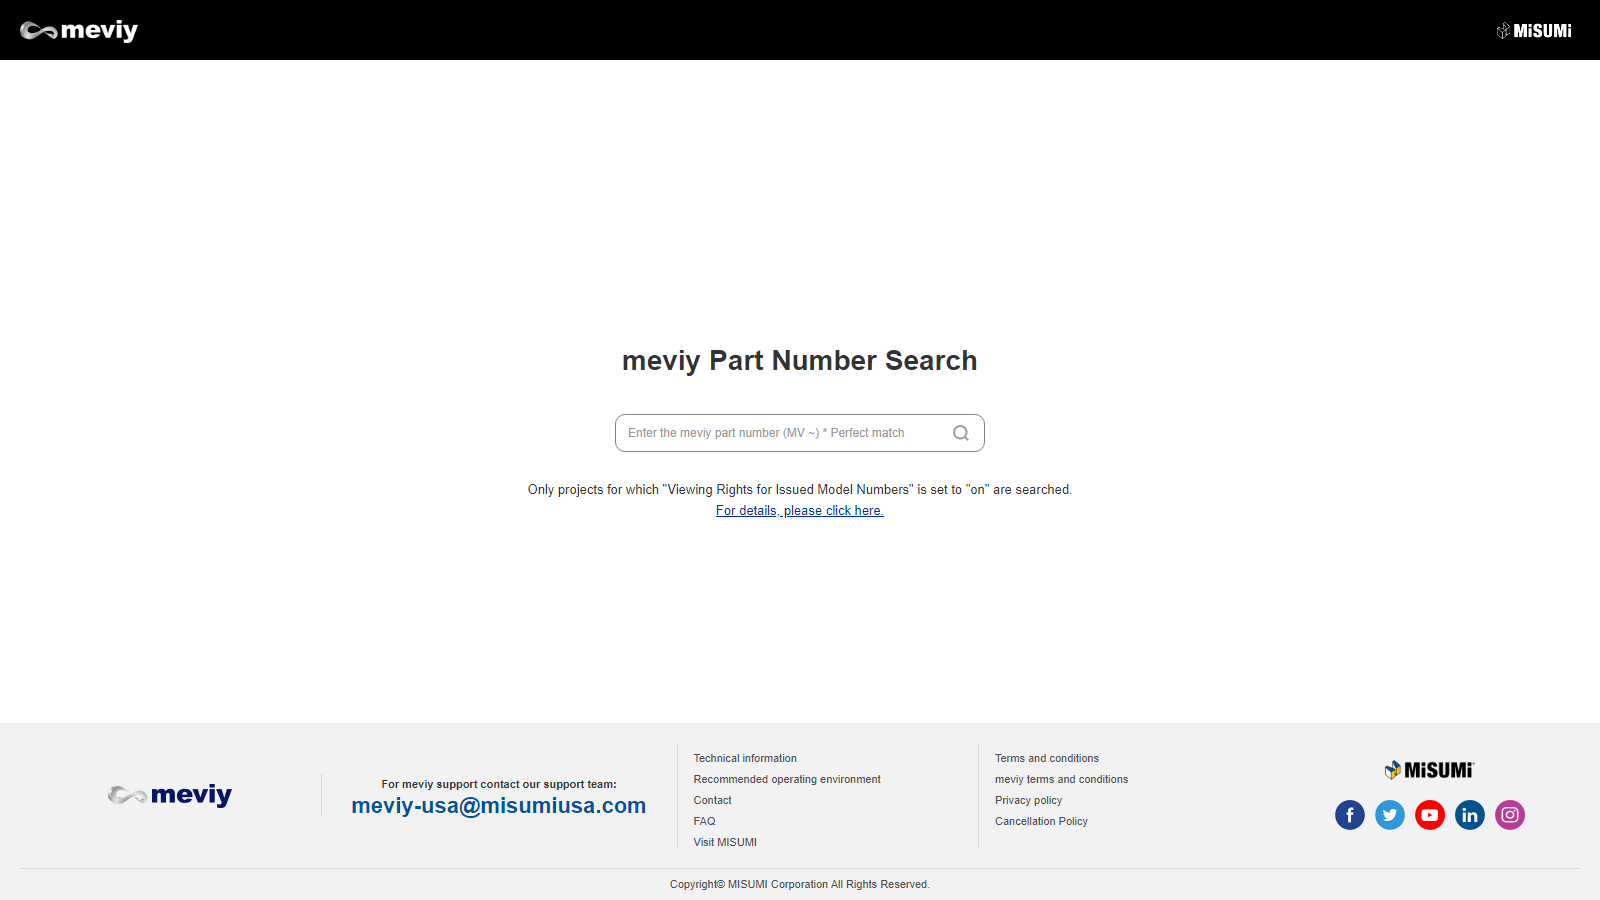 meviy Part Number Search screen